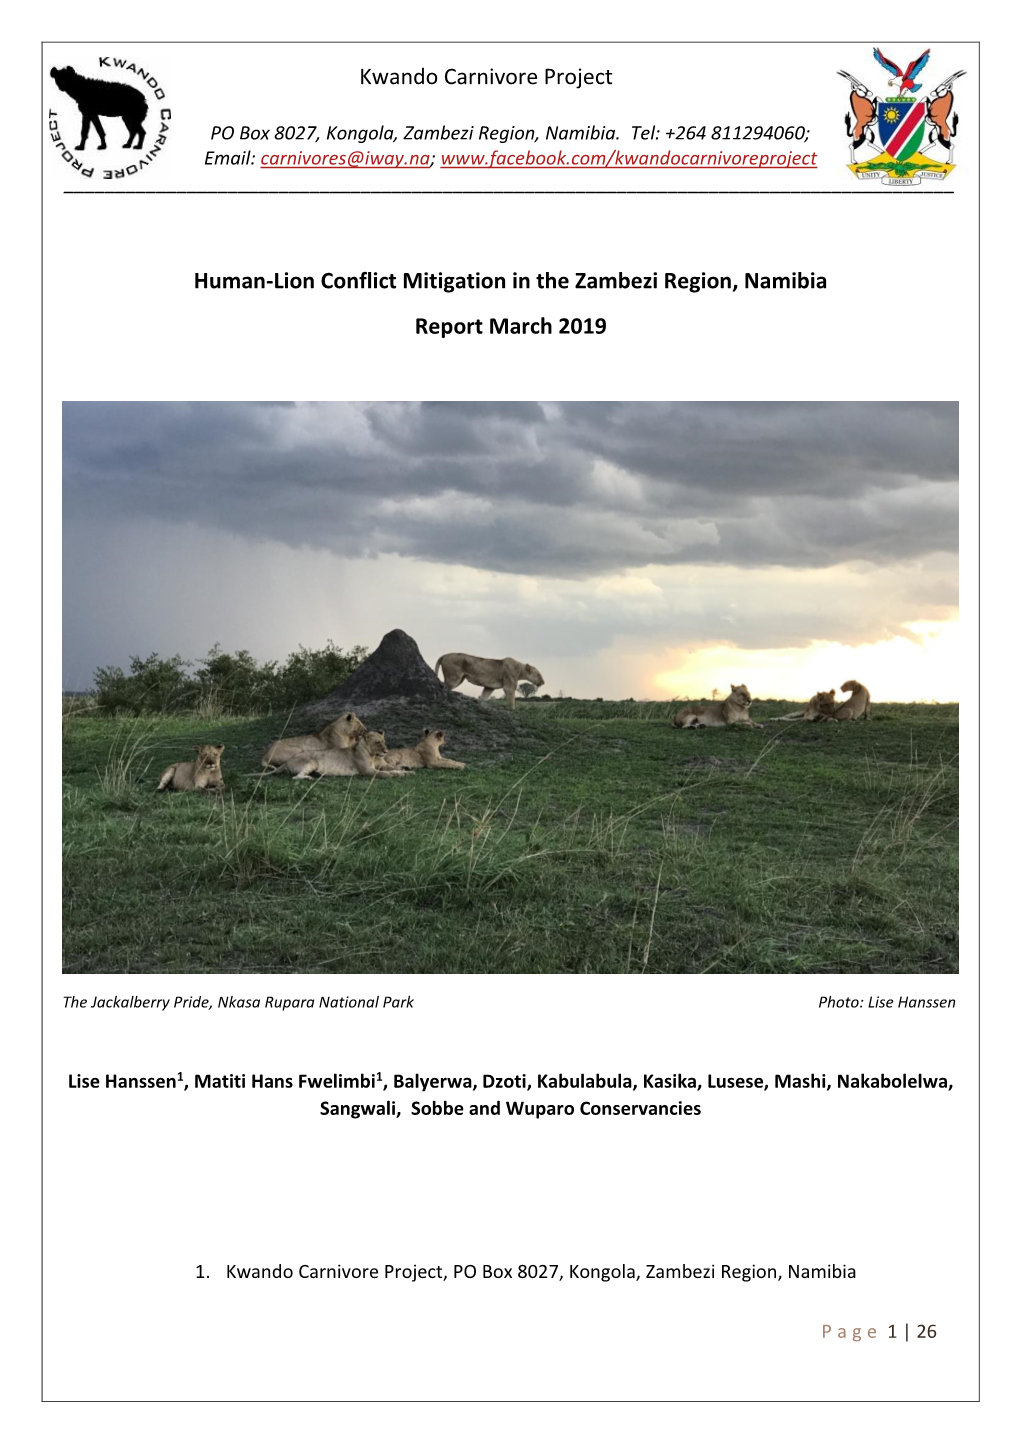 Kwando Carnivore Project Human-Lion Conflict Mitigation In